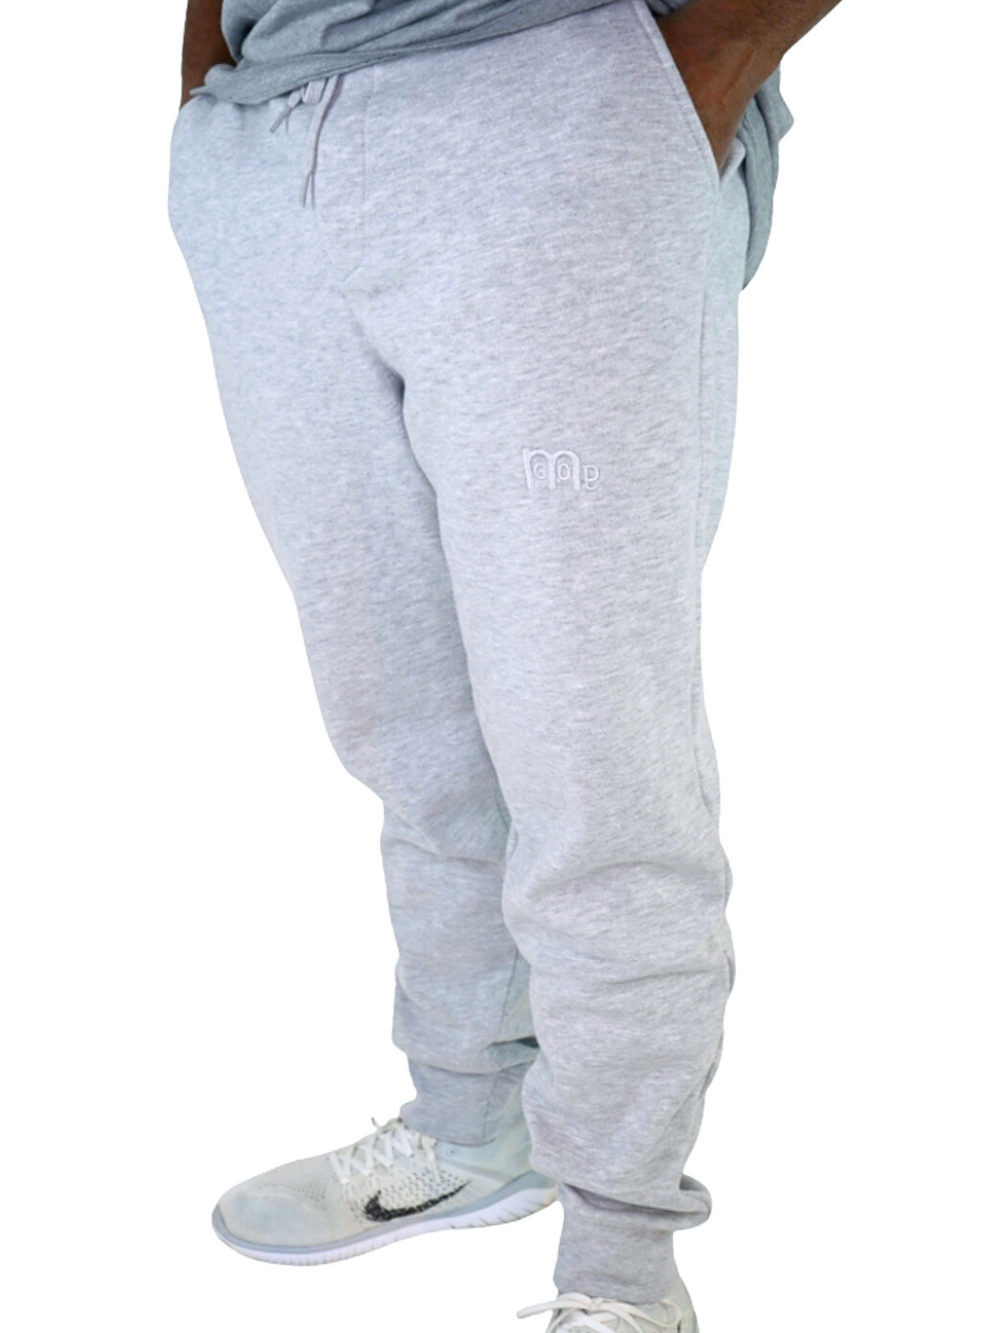 Experience the ultimate comfort in Men's joggers with GODinme! Made with premium quality fabric, these Grey GODinme sweat pants offer an elastic waistband for that perfectly relaxed fit. Featuring ribbing ankle cuffs, sewn eyelets, and the signature GODinme logo (in Grey) at left leg.